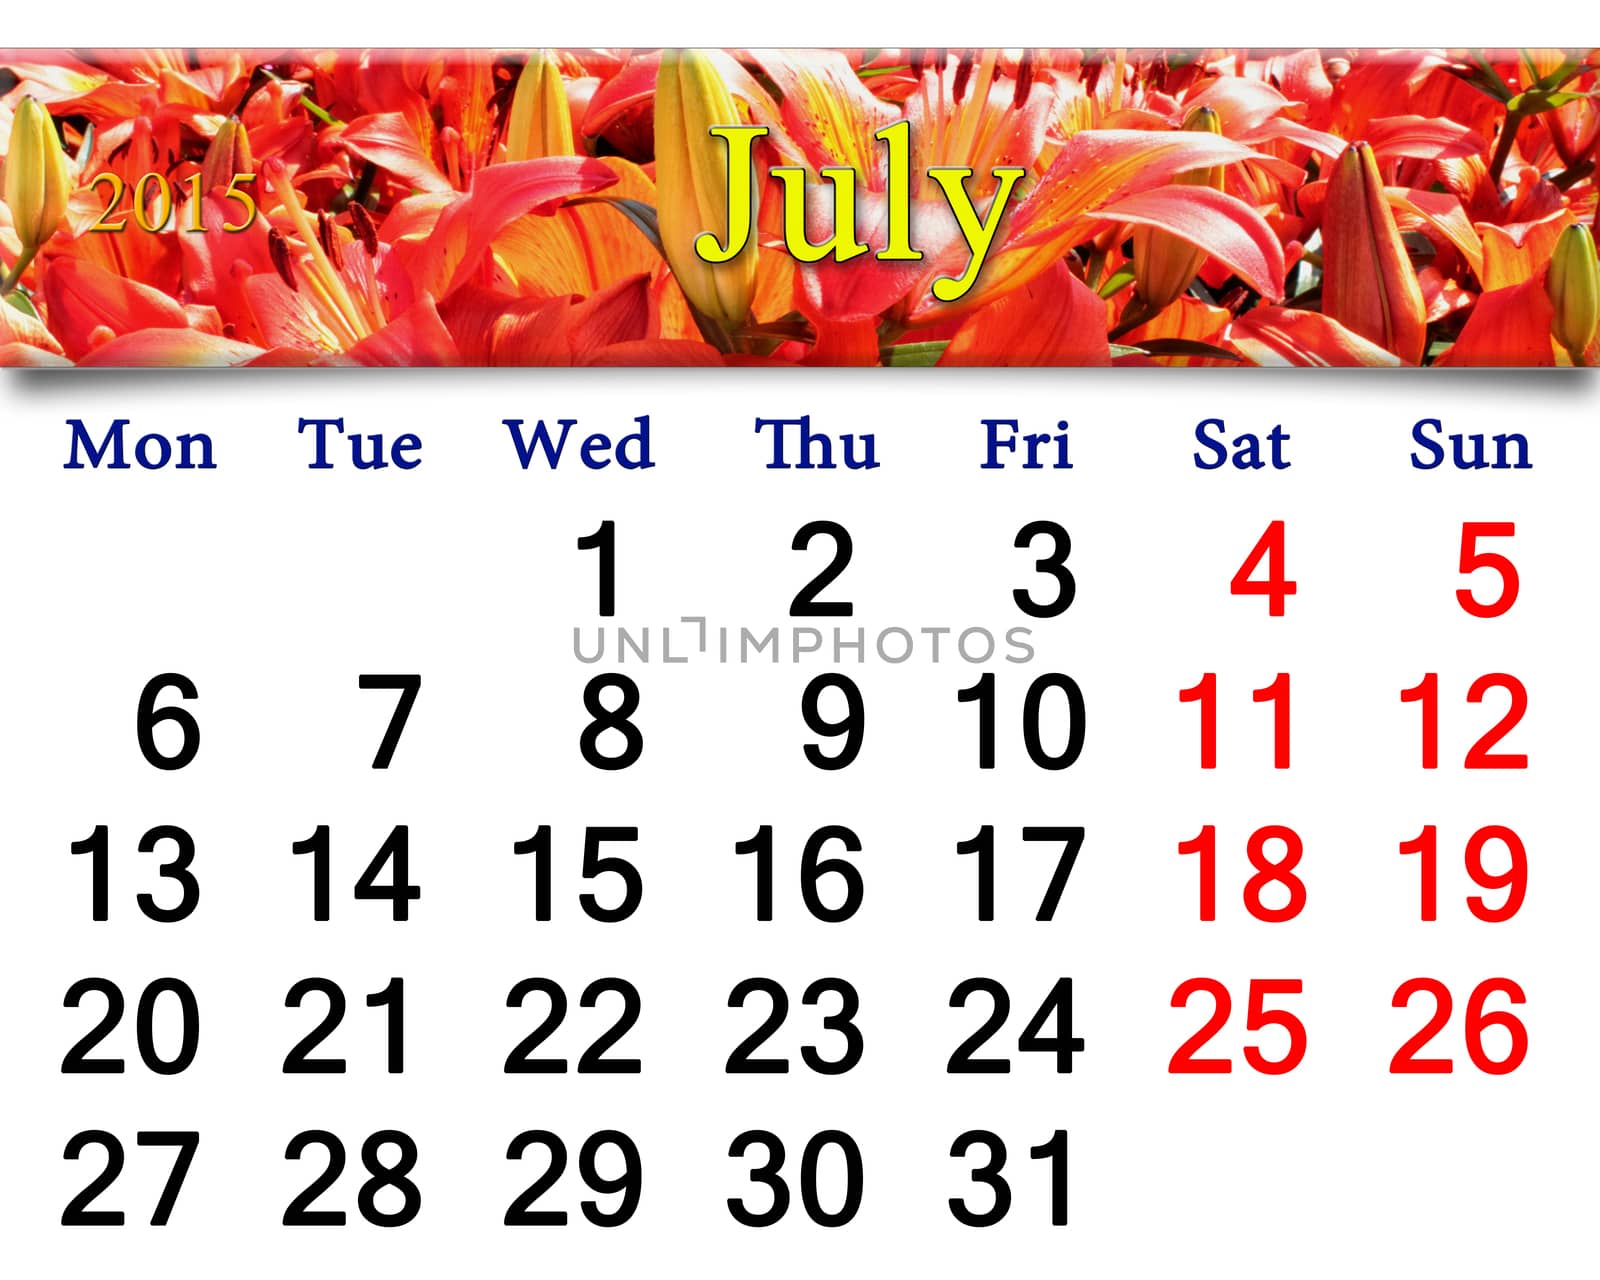 calendar for July of 2015 on red lilies by alexmak